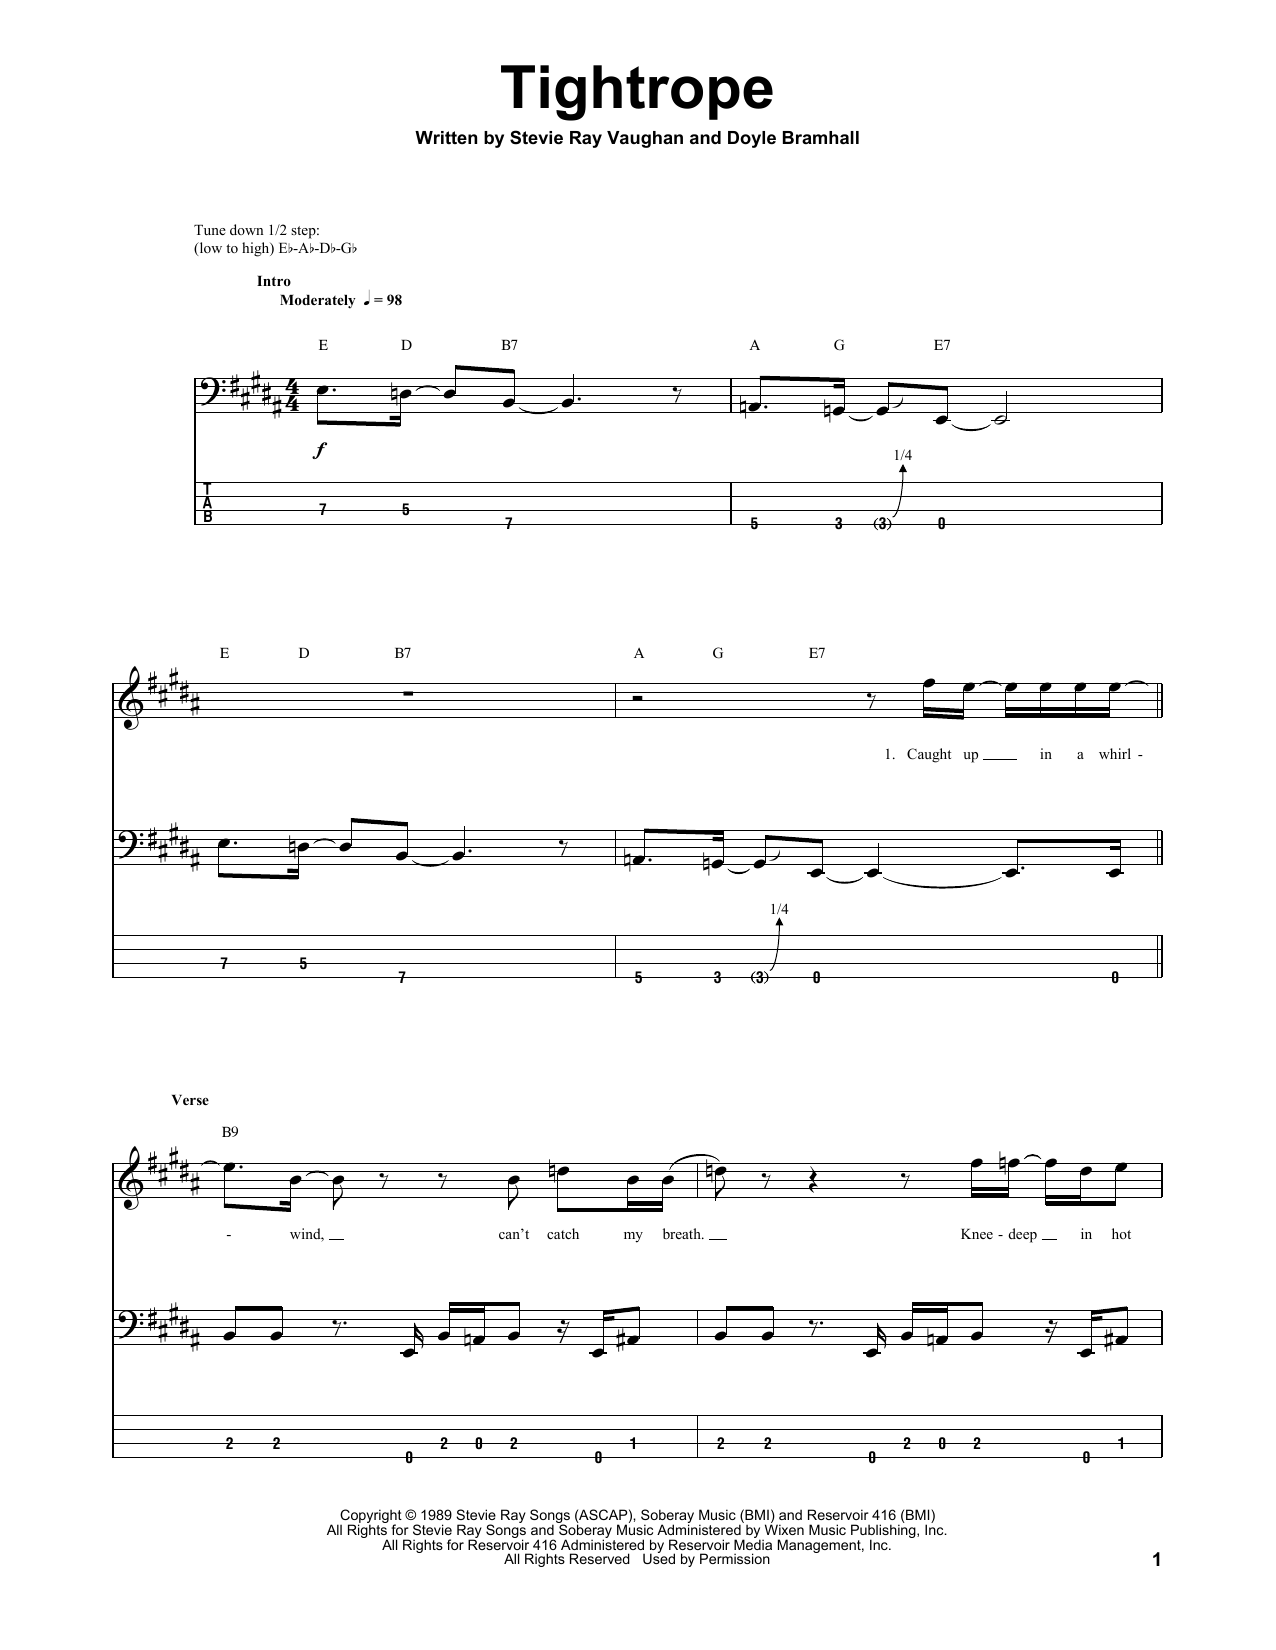 Download Stevie Ray Vaughan Tightrope Sheet Music